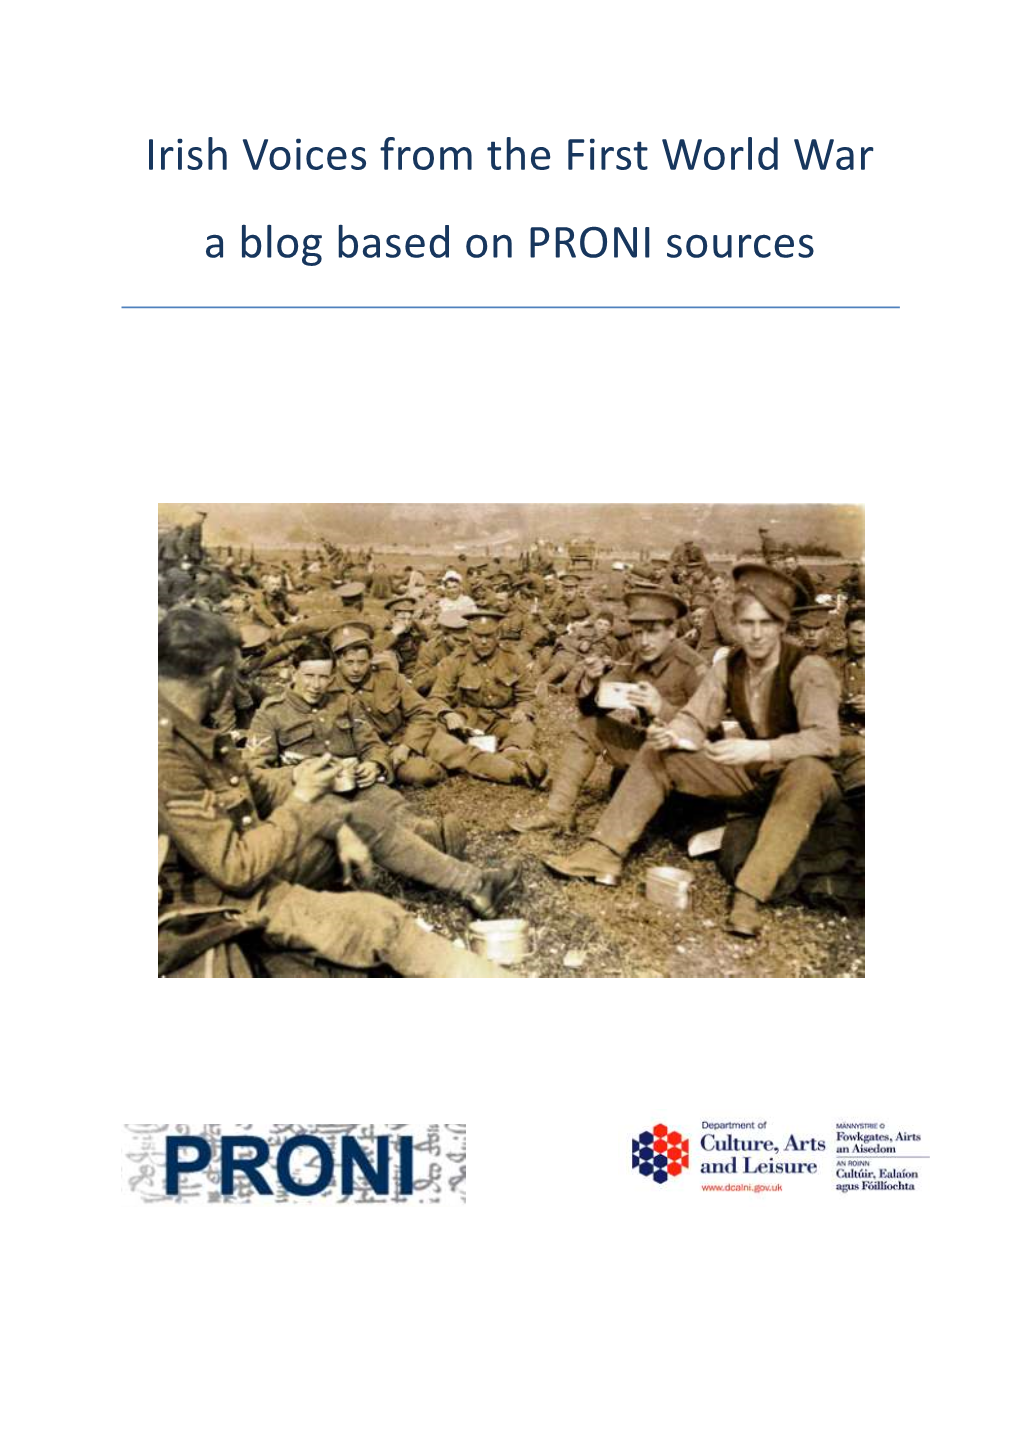 Irish Voices from the First World War a Blog Based on PRONI Sources